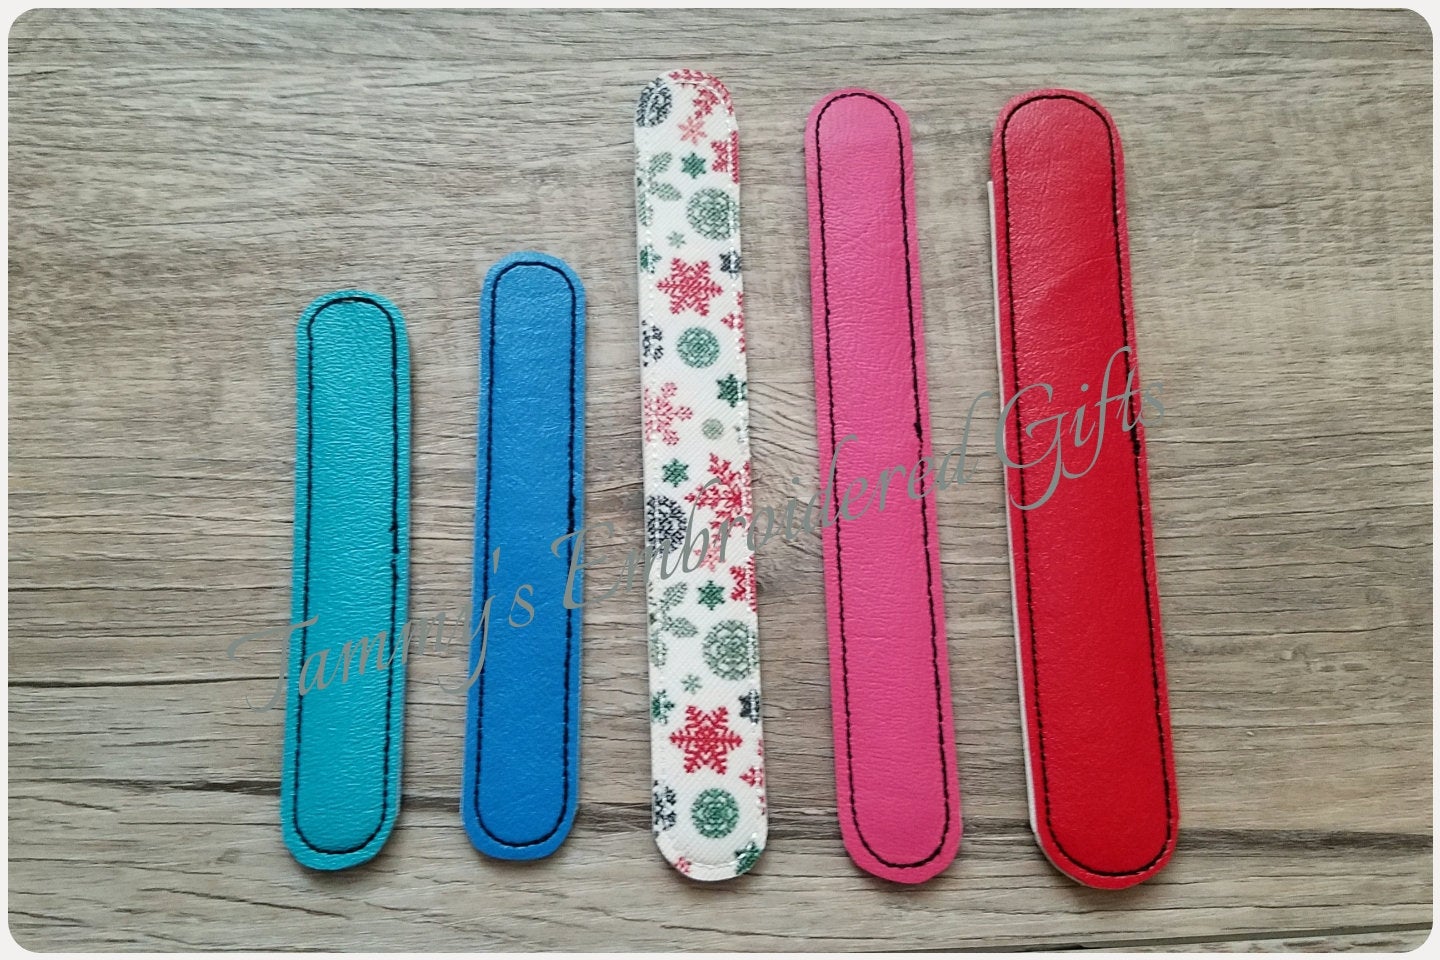 ITH Digital Embroidery Pattern for Nail File Sleeves / Covers 4